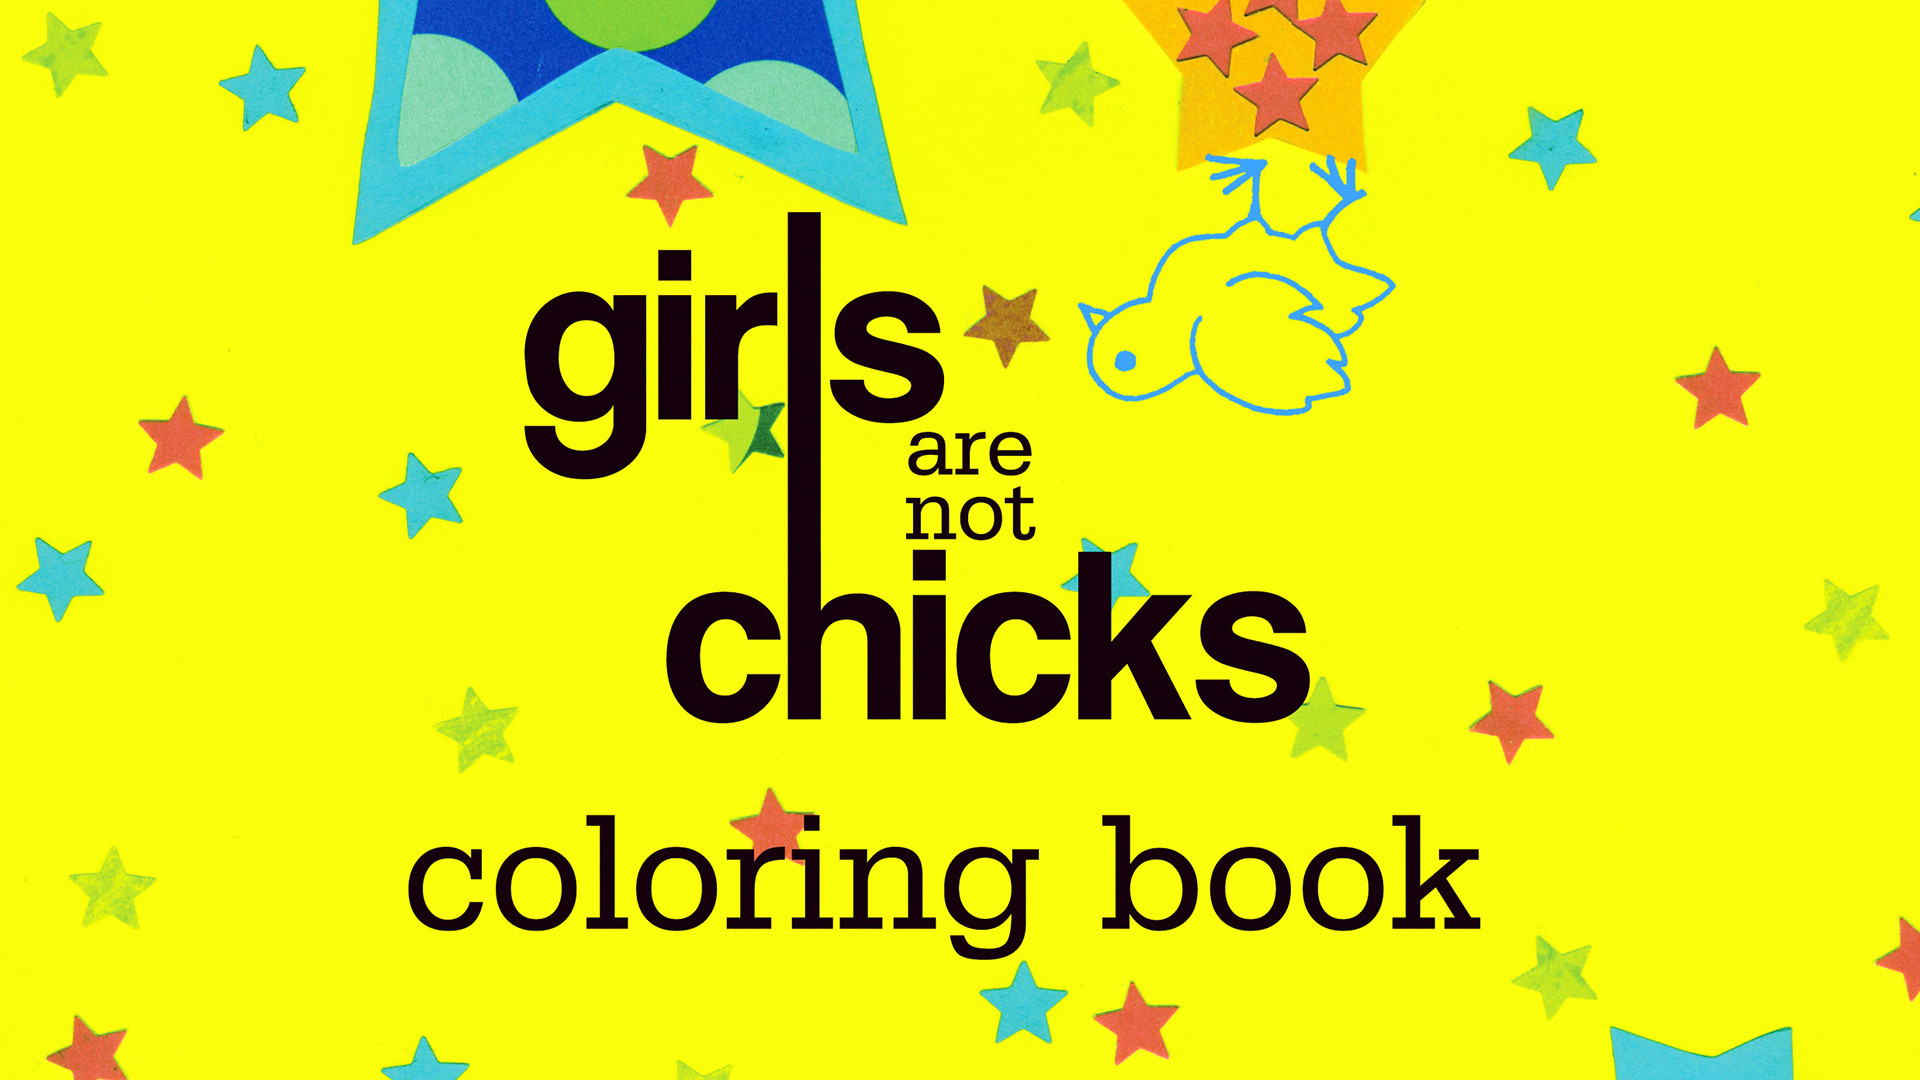 Girls Are Not Chicks Coloring Book
 Girls Are Not Chicks Coloring Book on Save the Children